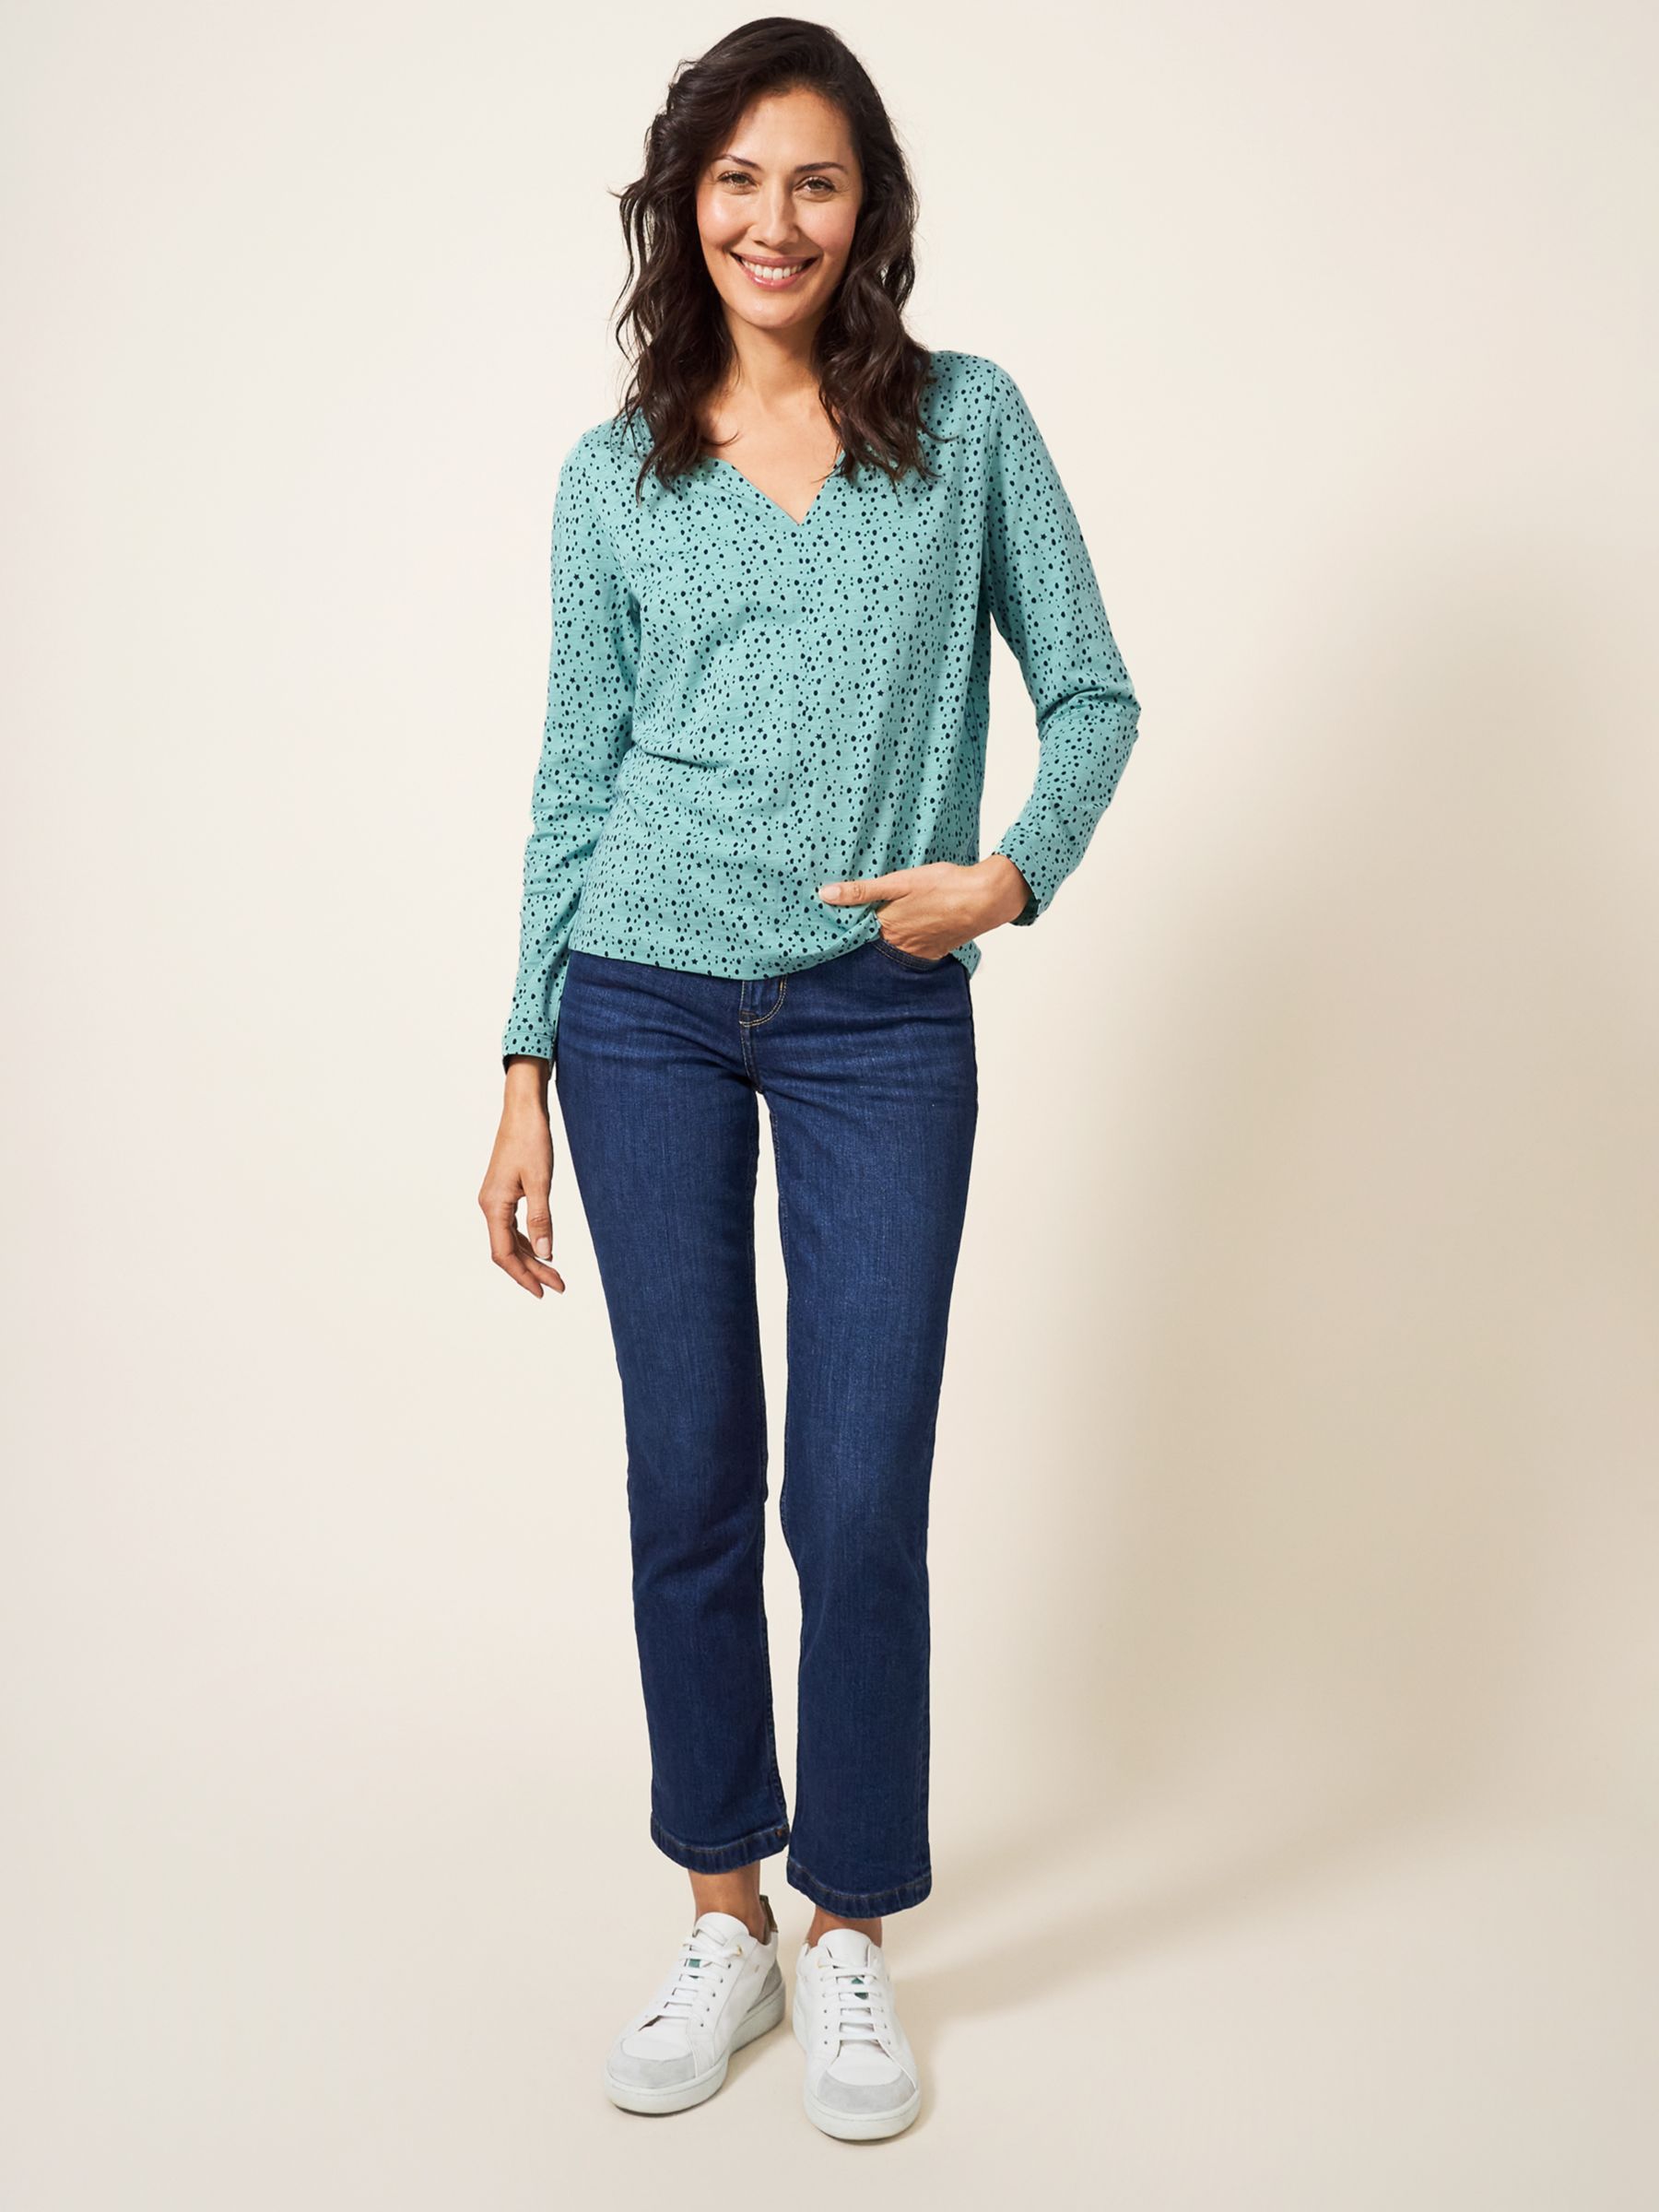 slå fiktion Genoplive White Stuff Nelly Long Sleeve Top, Teal at John Lewis & Partners